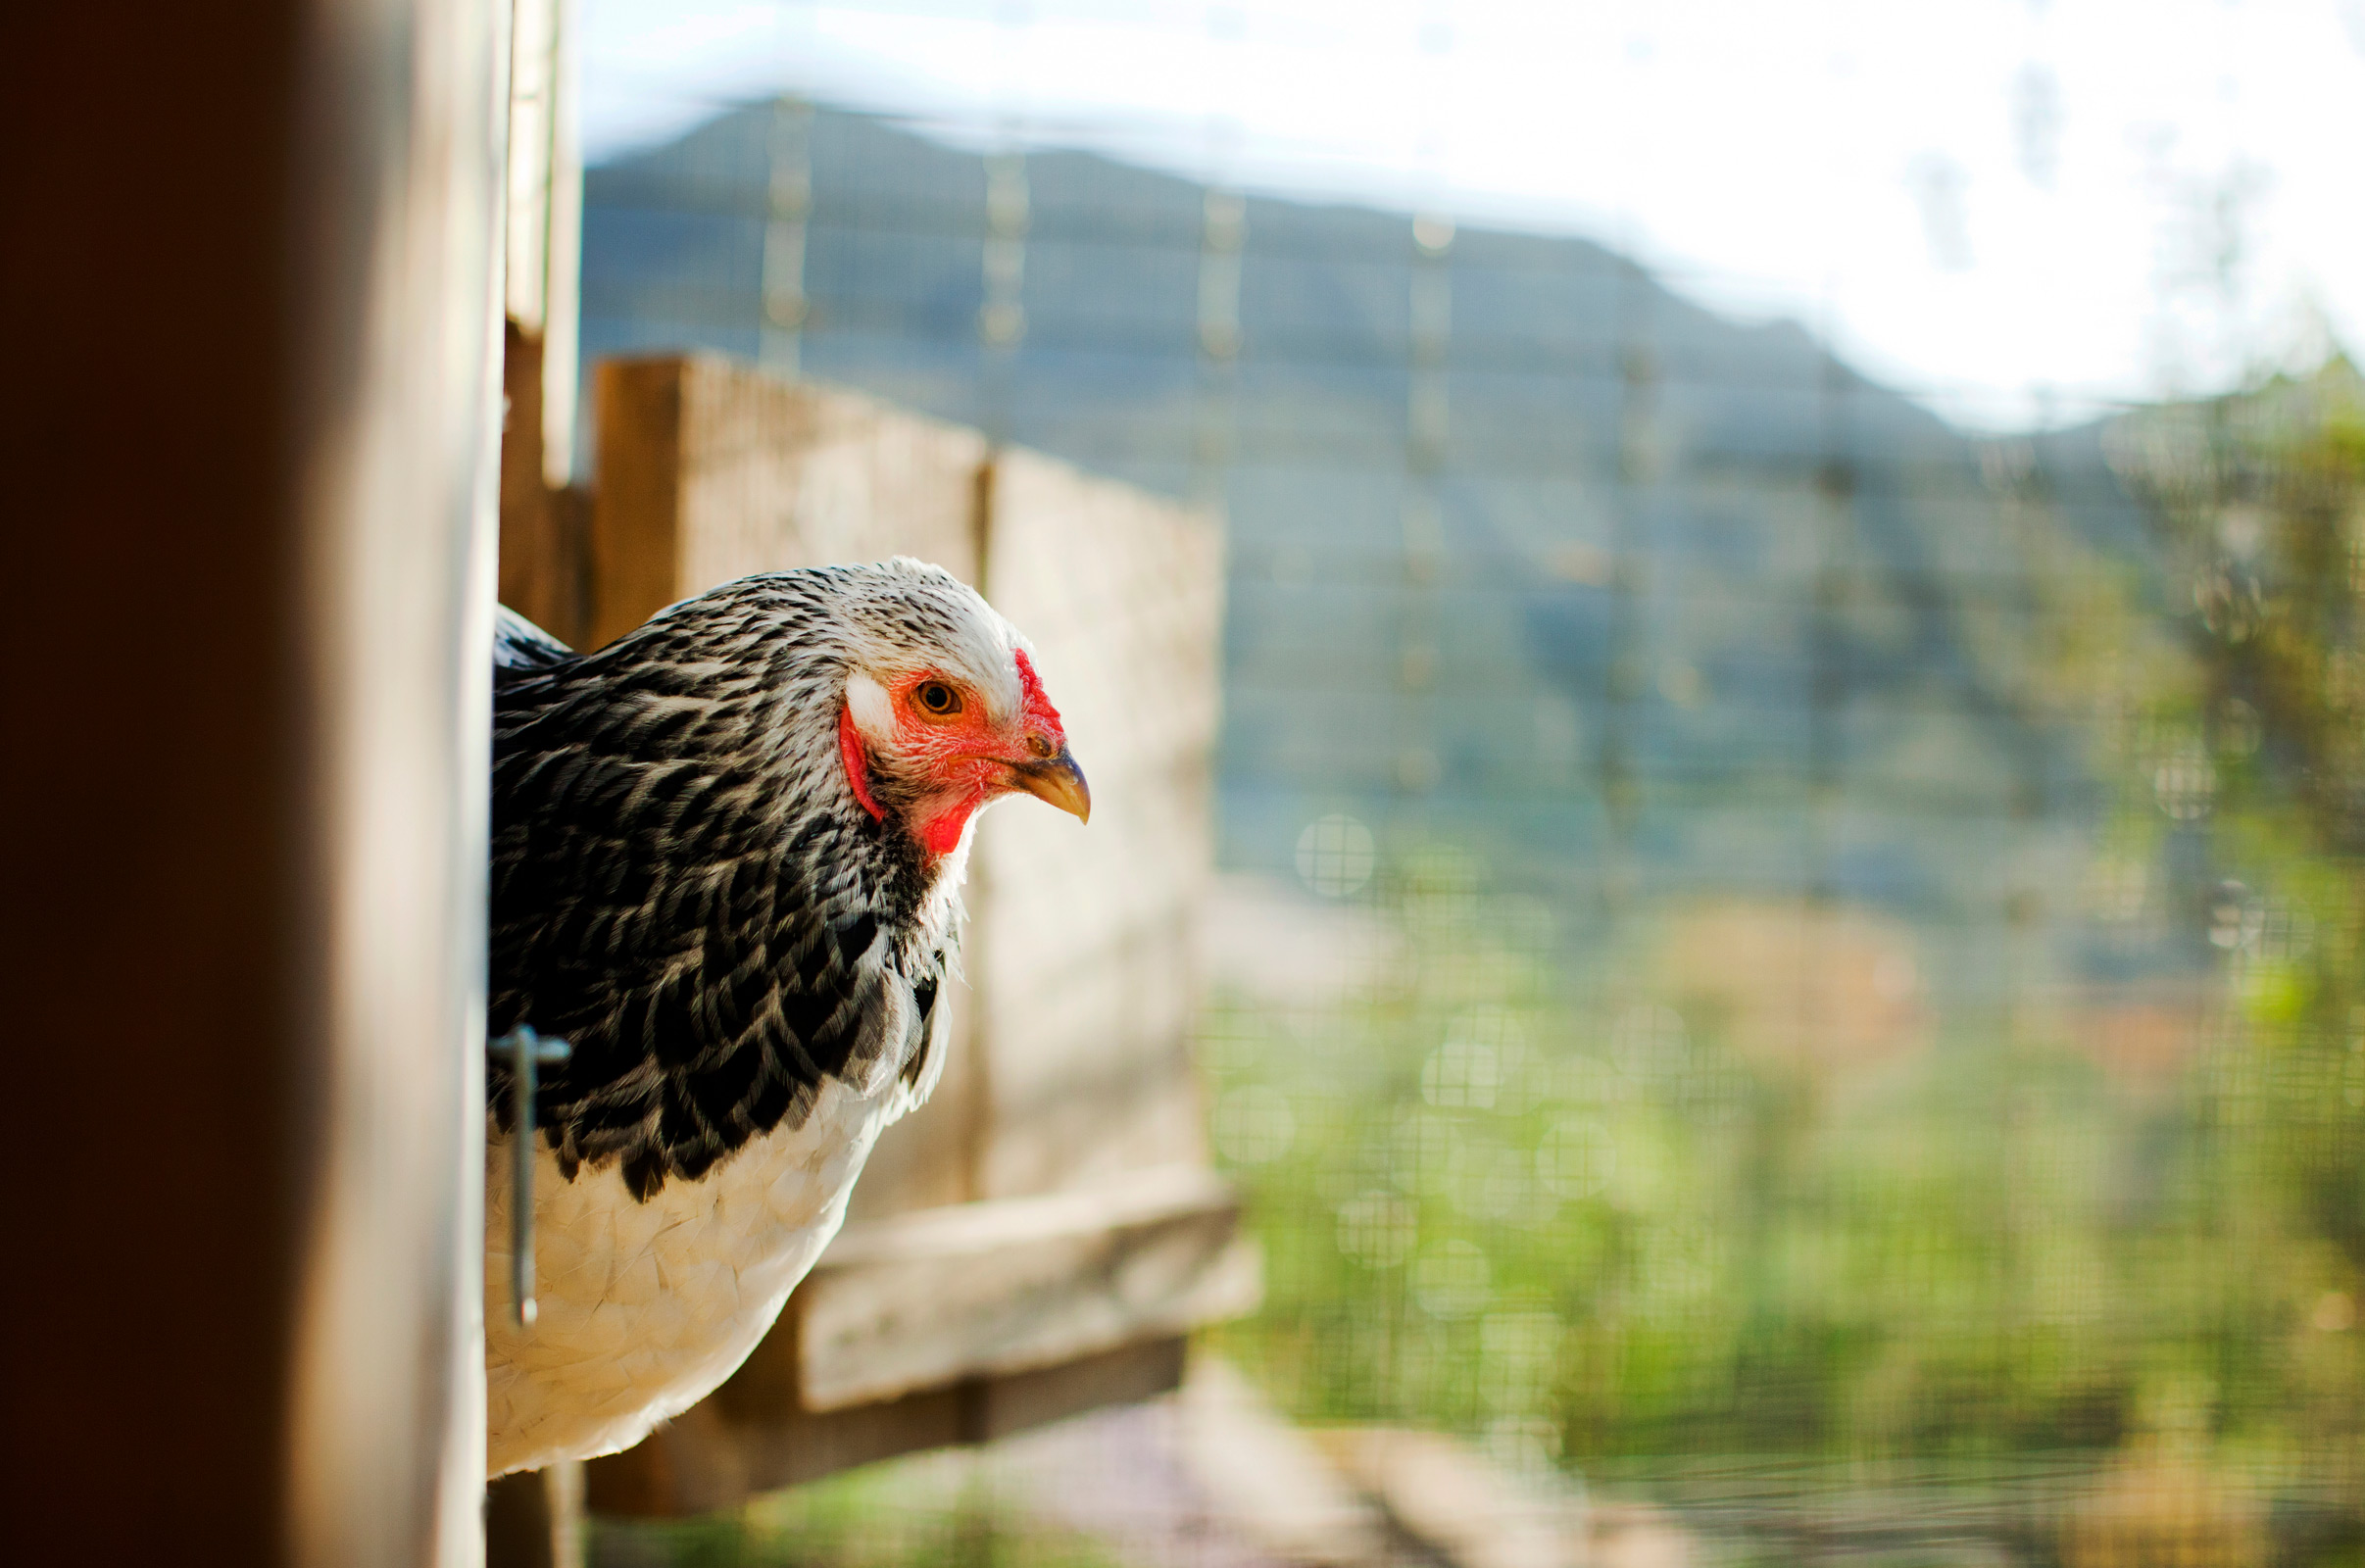 TheRanch_Chickens_3873_web